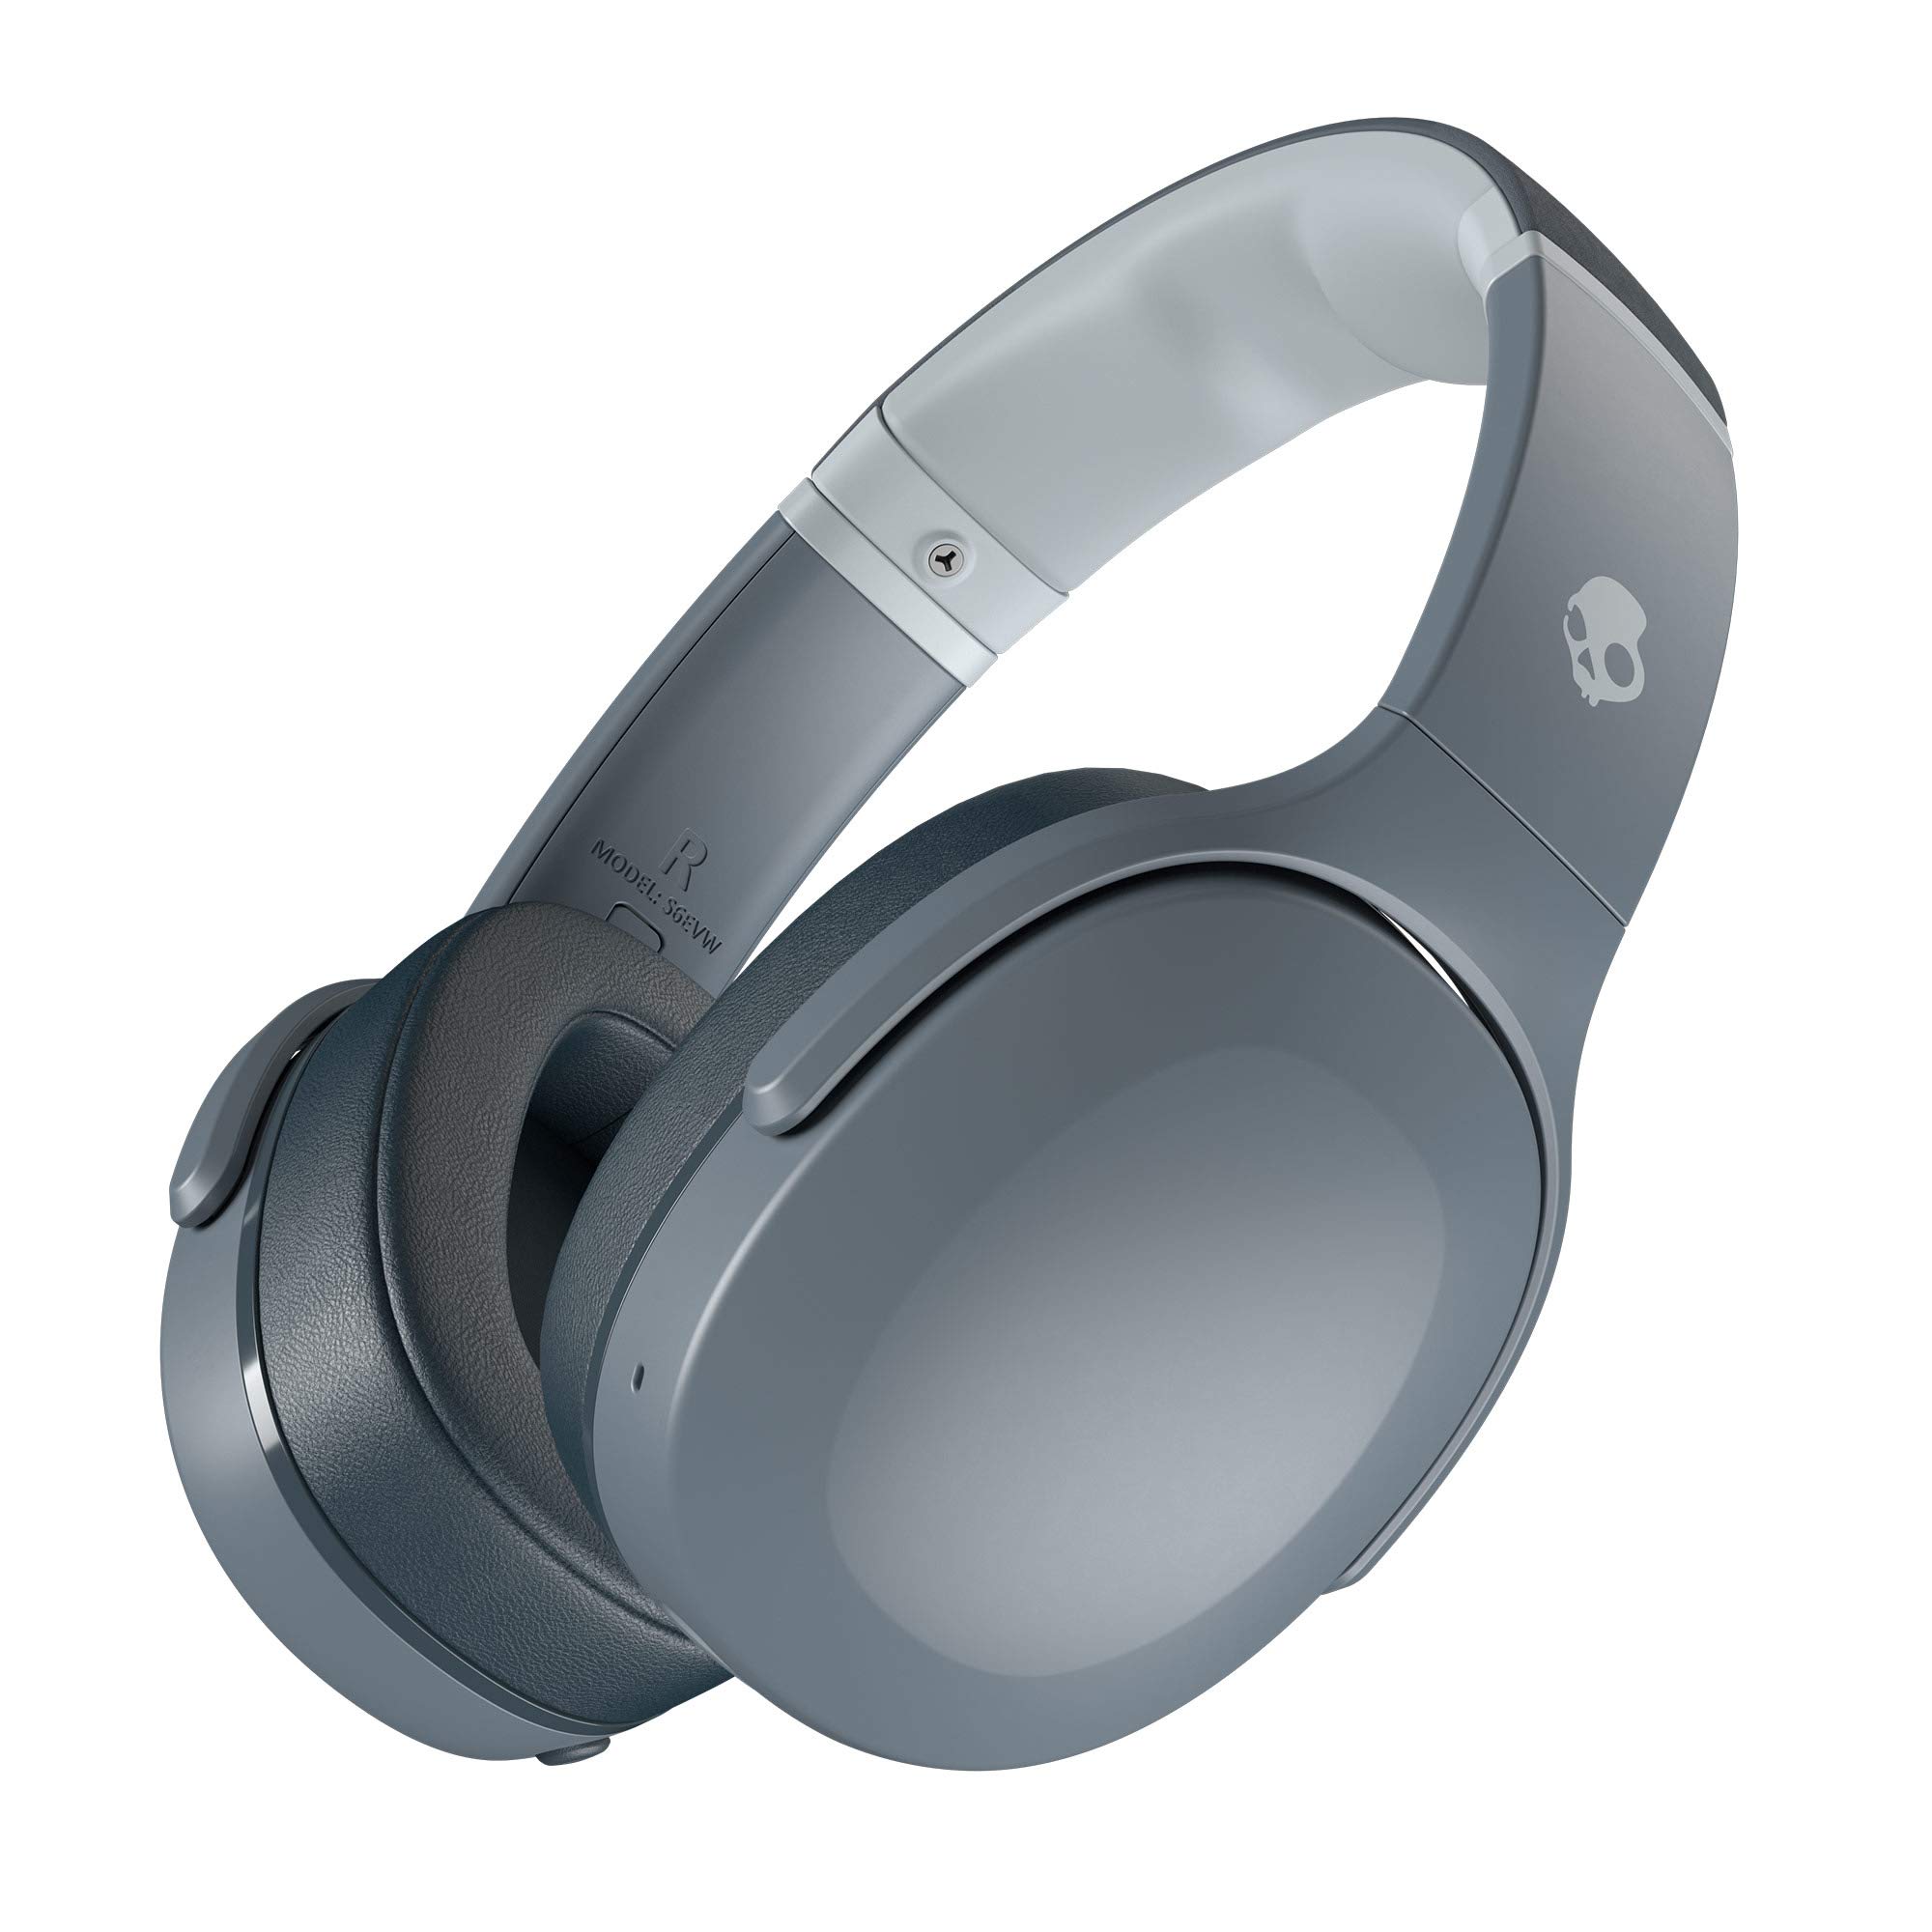 Skullcandy Crusher Evo Over-Ear Wireless Headphones - Grey (Discontinued by Manufacturer)